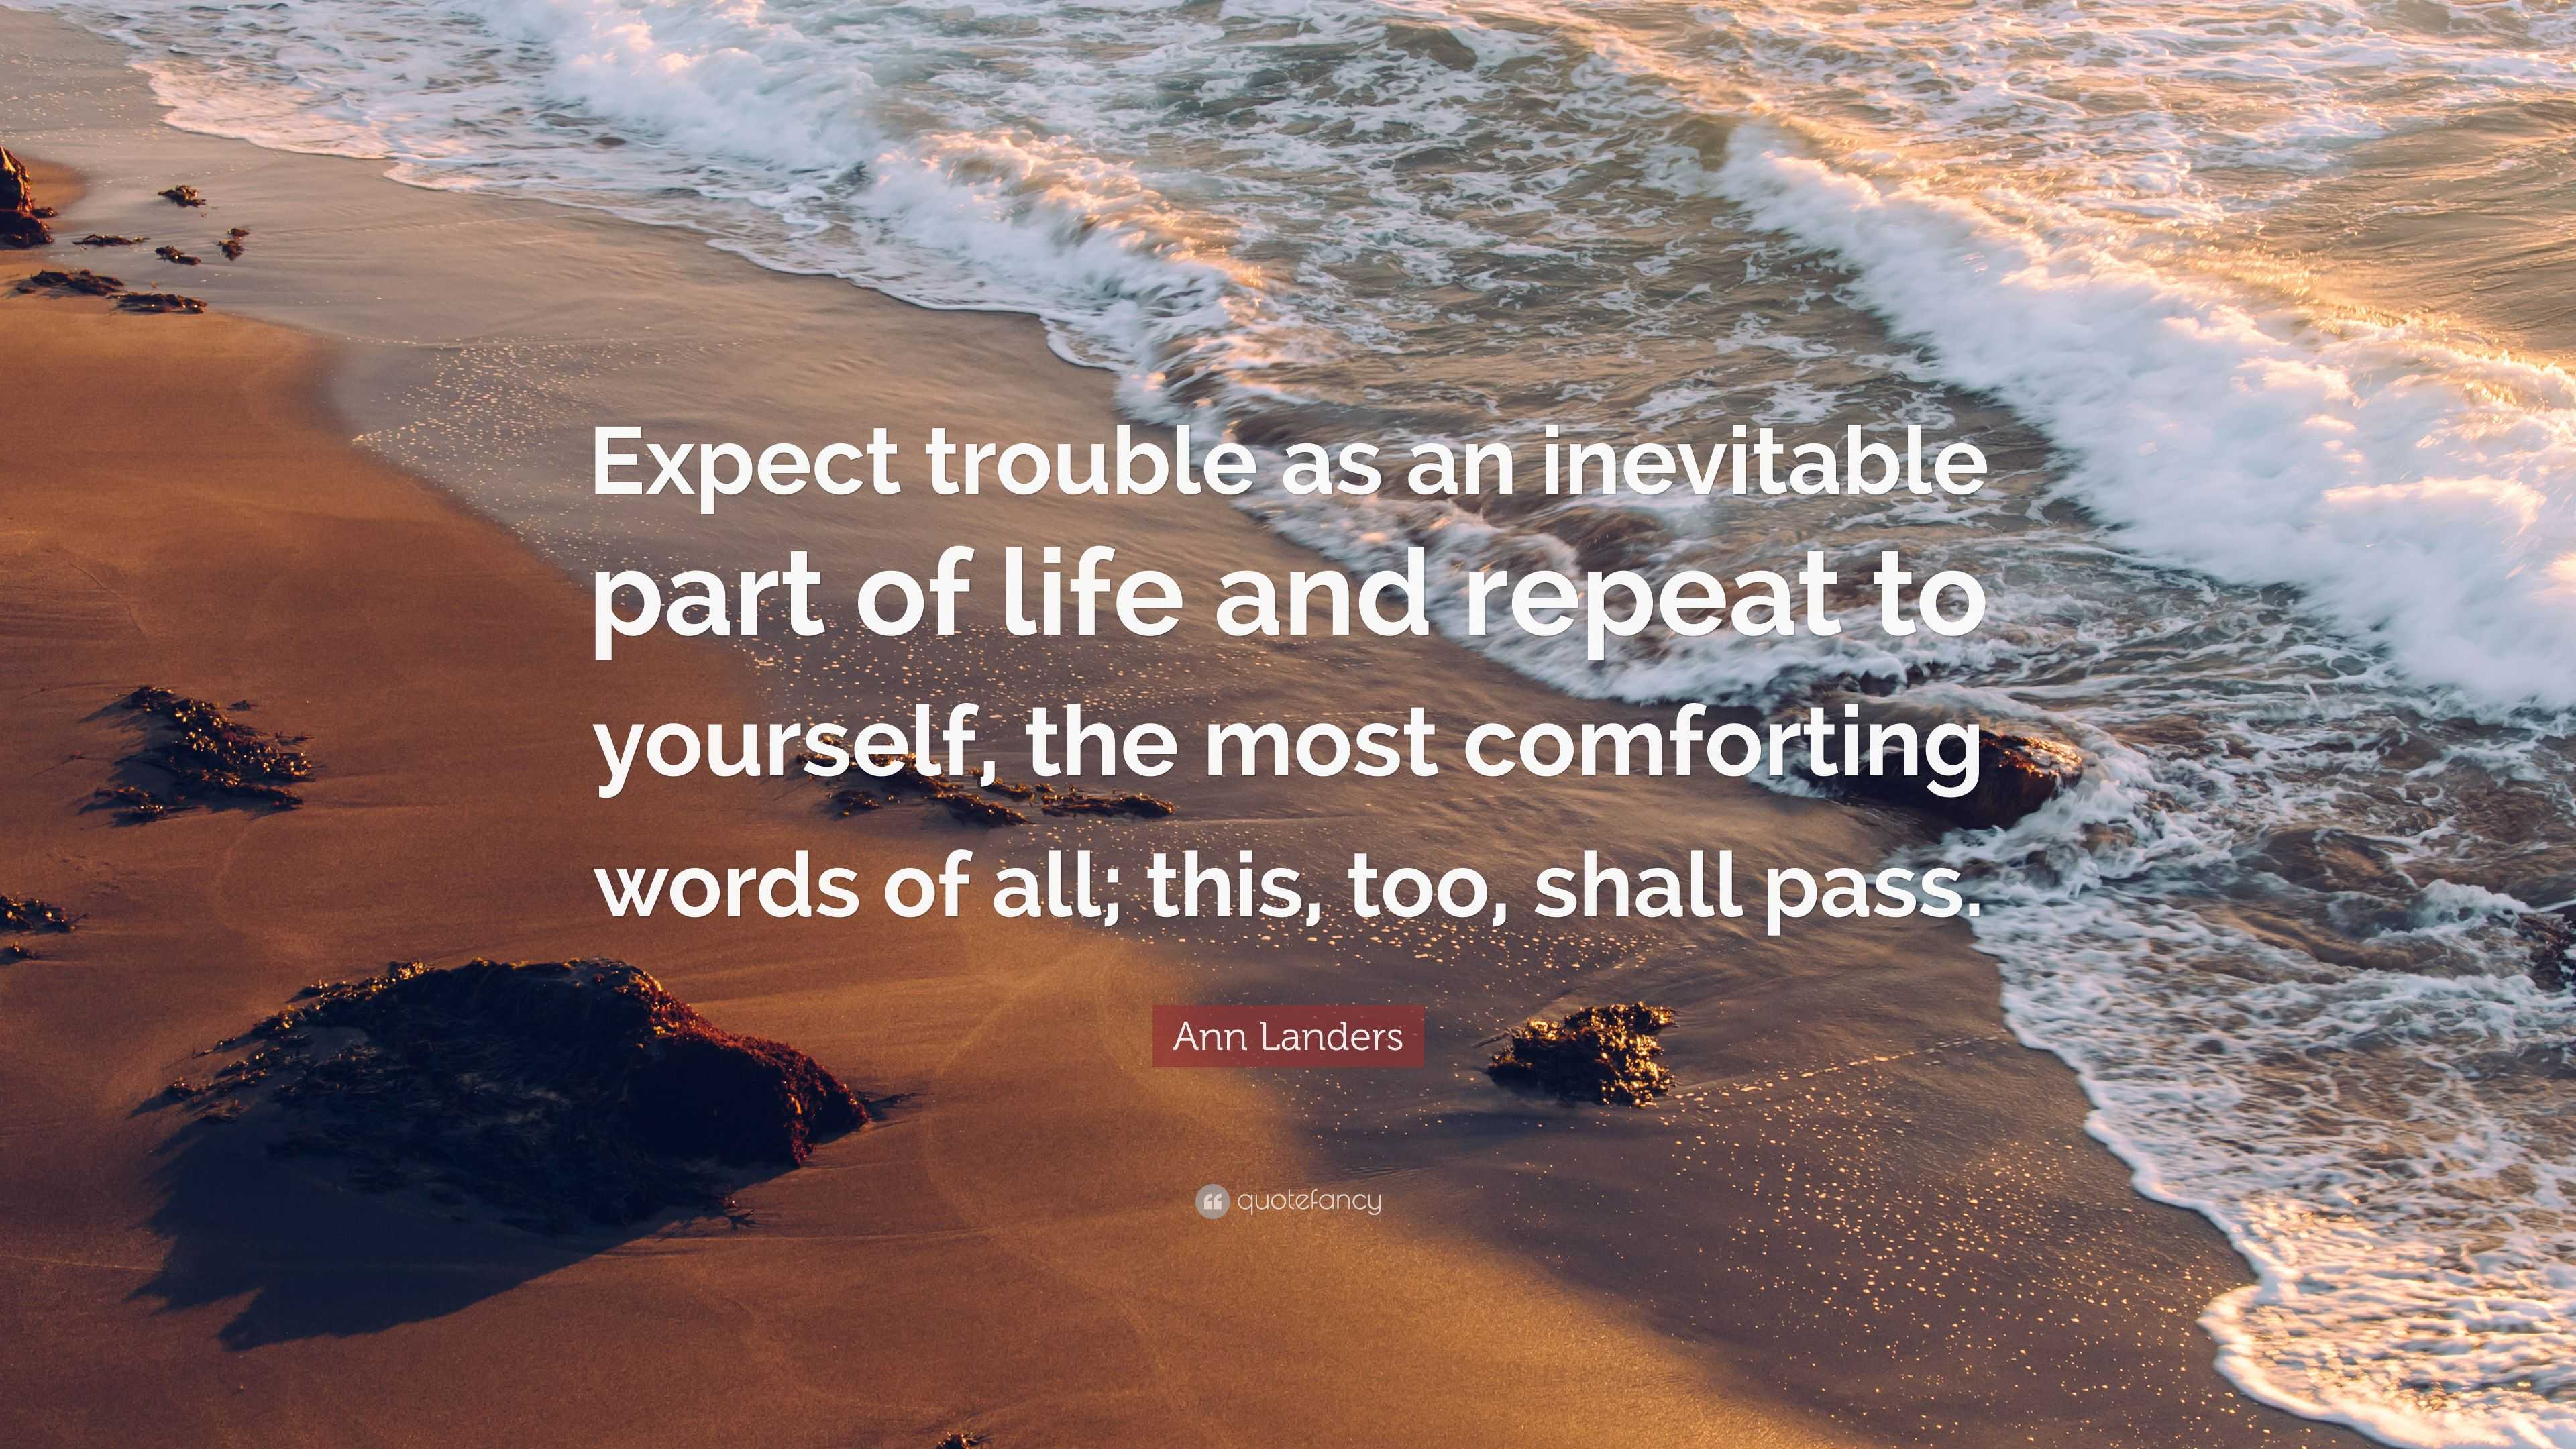 Ann Landers Quote: “Expect trouble as an inevitable part of life and ...